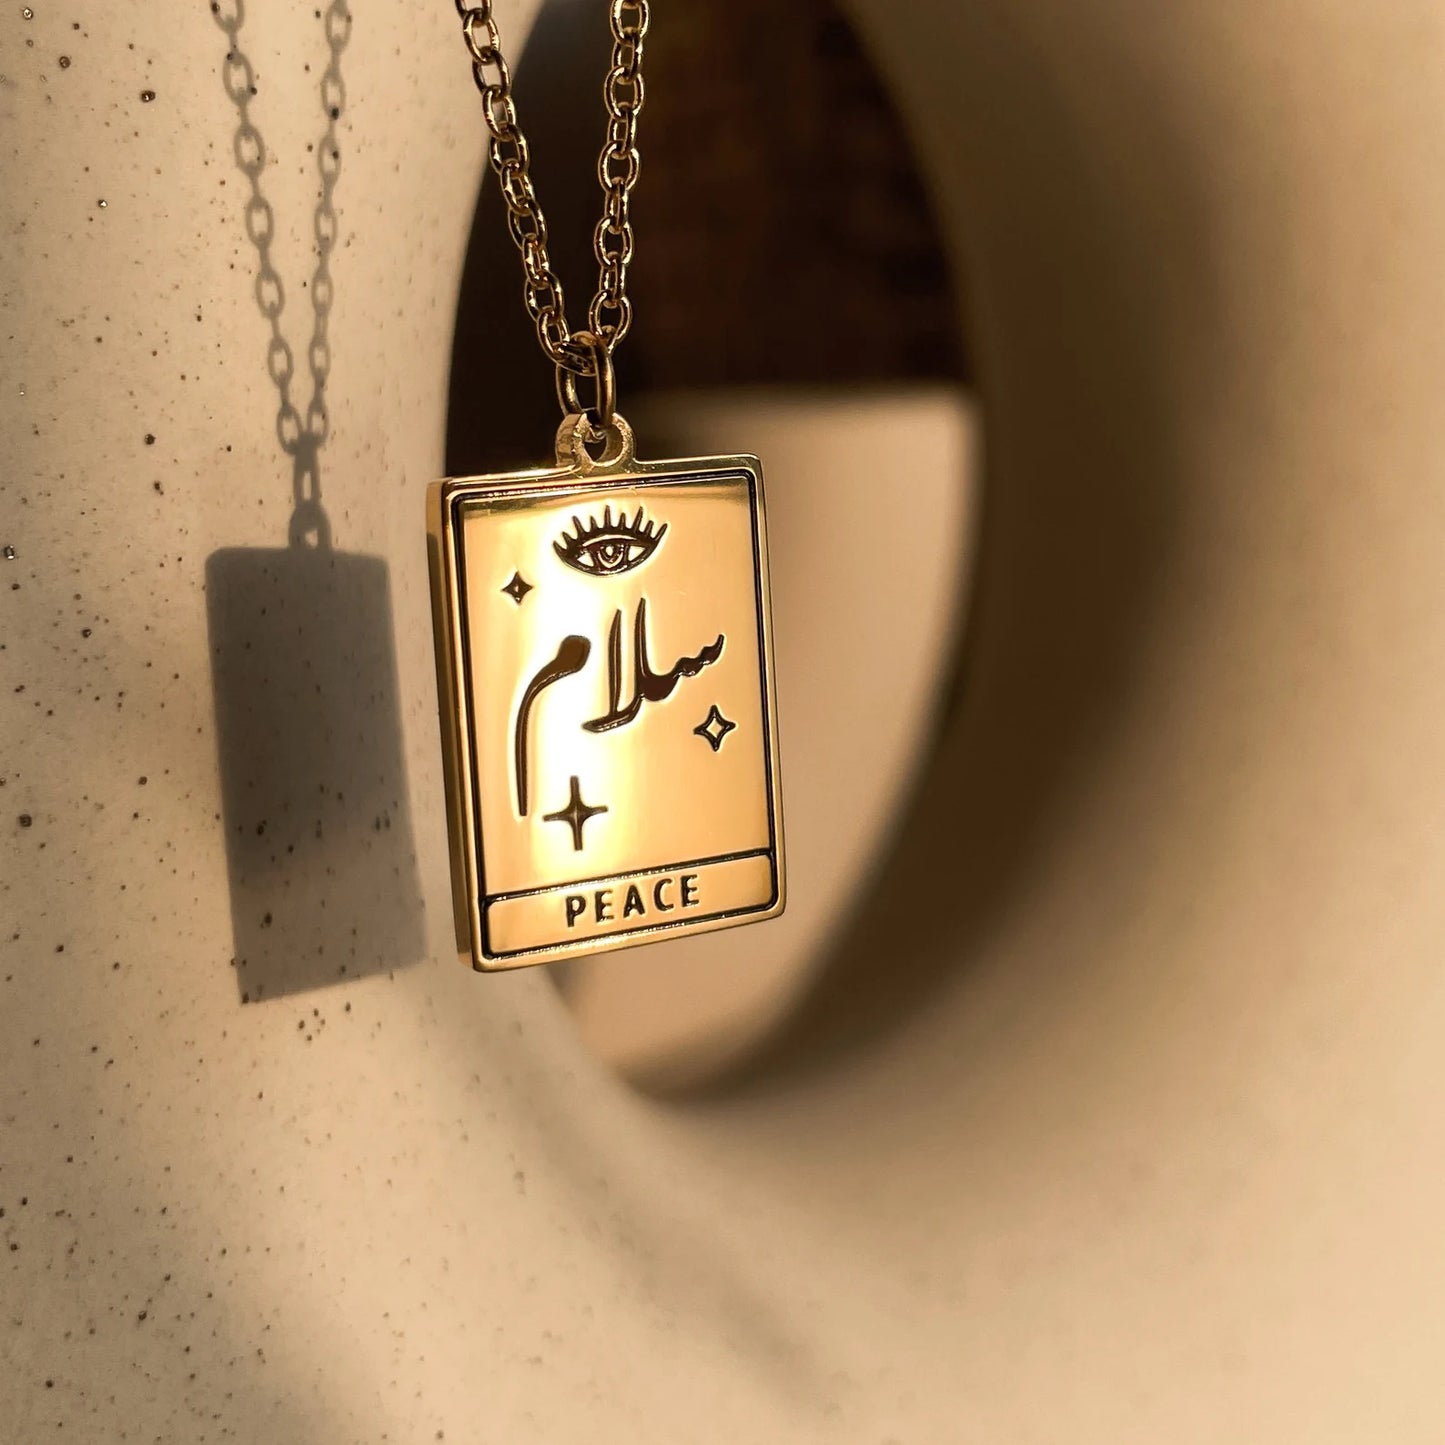 Gold Name Pendant with Initial made in real gold. Designed and handcrafted in the UAE. This unique Gold Name Pendant with Initial is locally handcrafted with the highest quality materials and artisans available in Dubai.